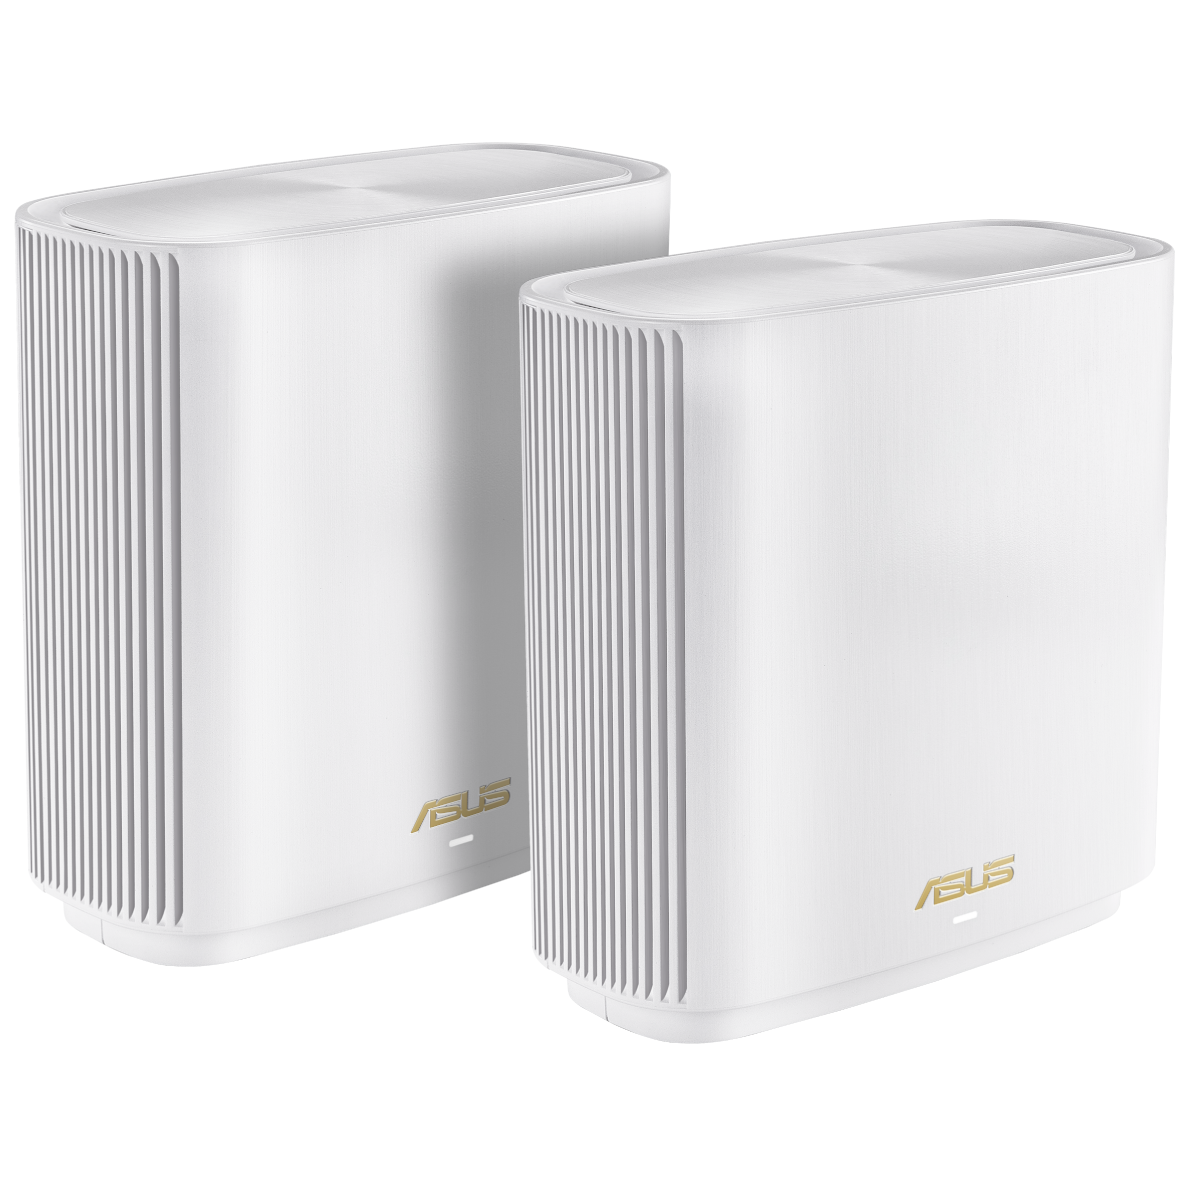 ASUS ZenWifi AX (XT8) AX6600 WiFi 6 Mesh System, Pack of 2 - White